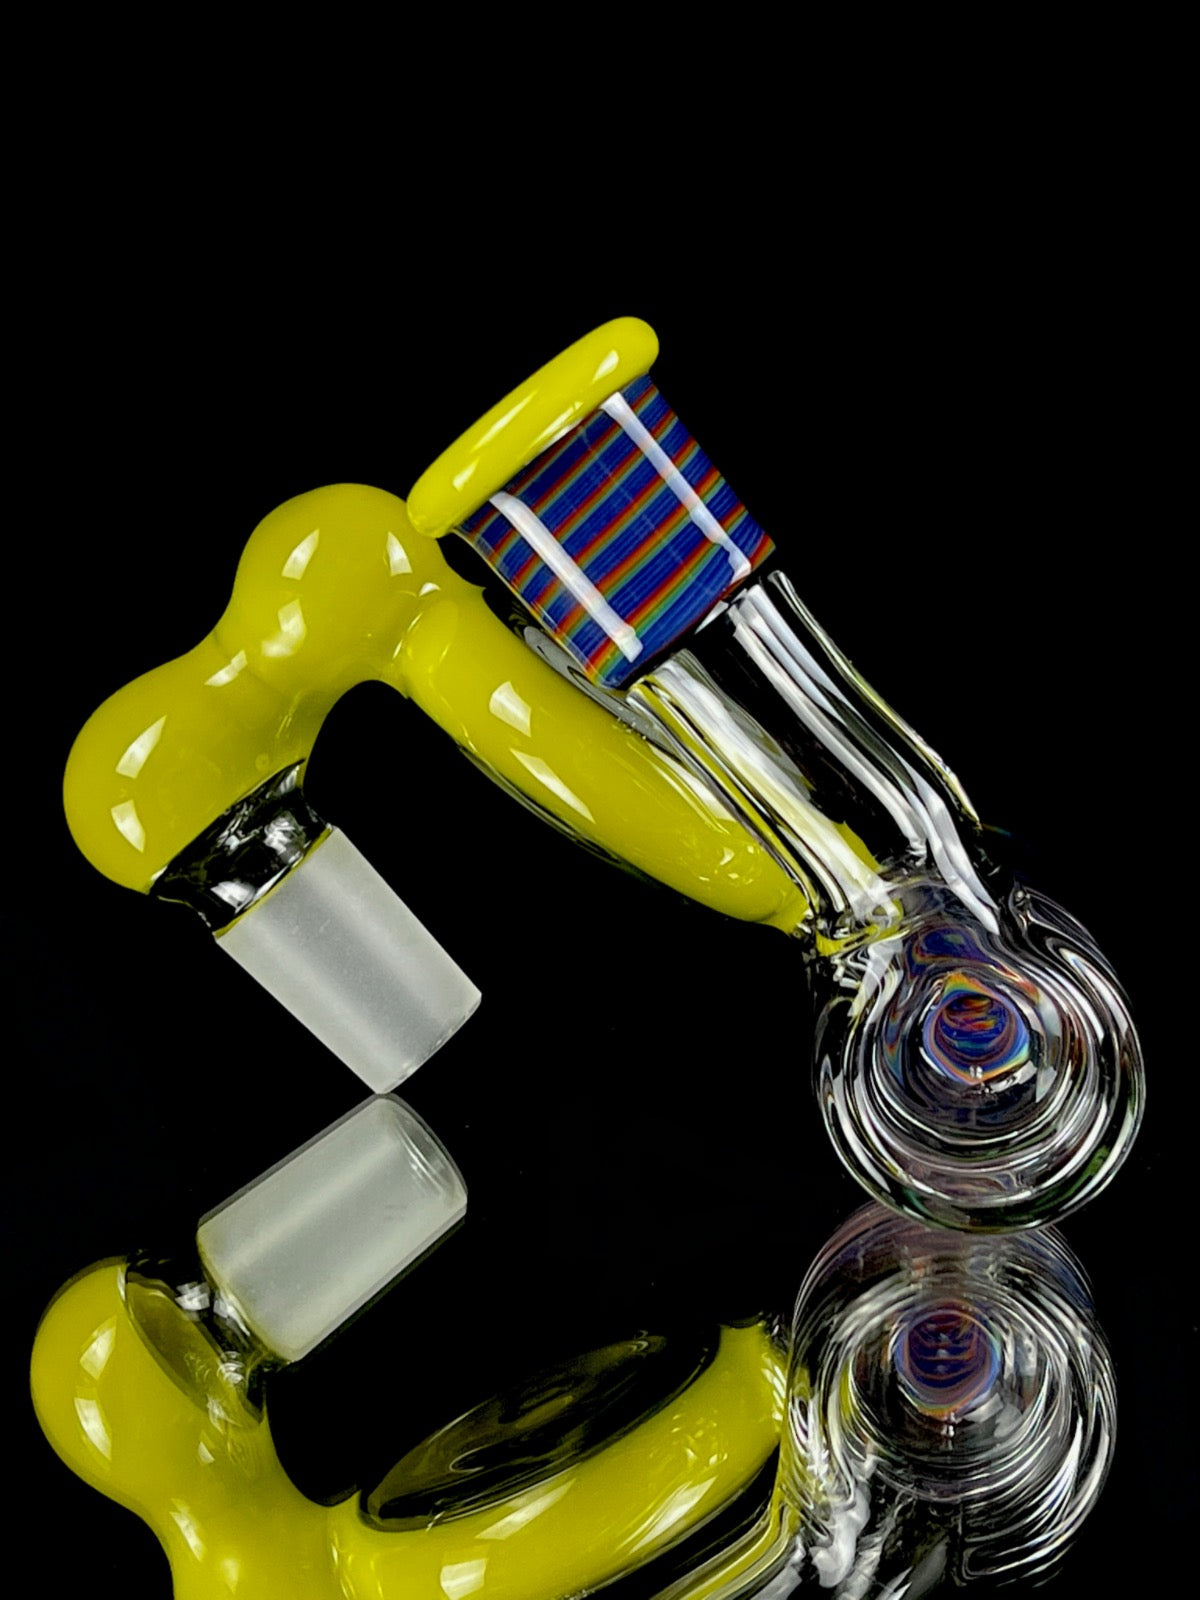 Blueberry rainbow x Roswell collins bub by OJ Flame